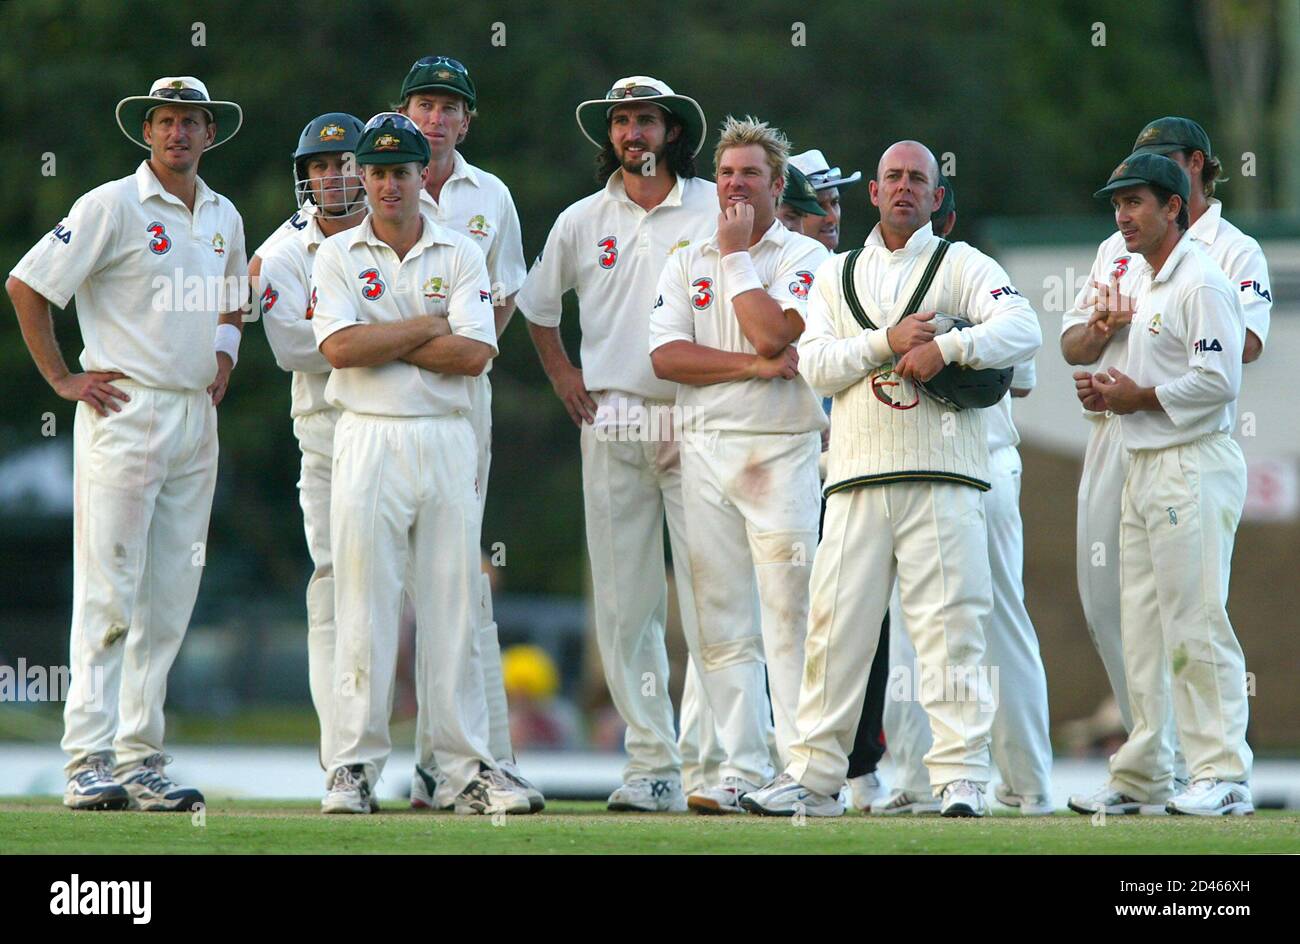 Australian team members look towards the third umpire's booth as they wait for a decision that allowed Shane Warne (6th-L) to equal the 527 test wicket-takers record, on the fifth day of the second test at Cazaly's Stadium in the northern Australian city of Cairns July 13, 2004. Australia won the off-season two test match series against Sri Lanka 1-0 after the second match in Cairns ended in a draw. REUTERS/Tim Wimborne  TBW/SH Stock Photo